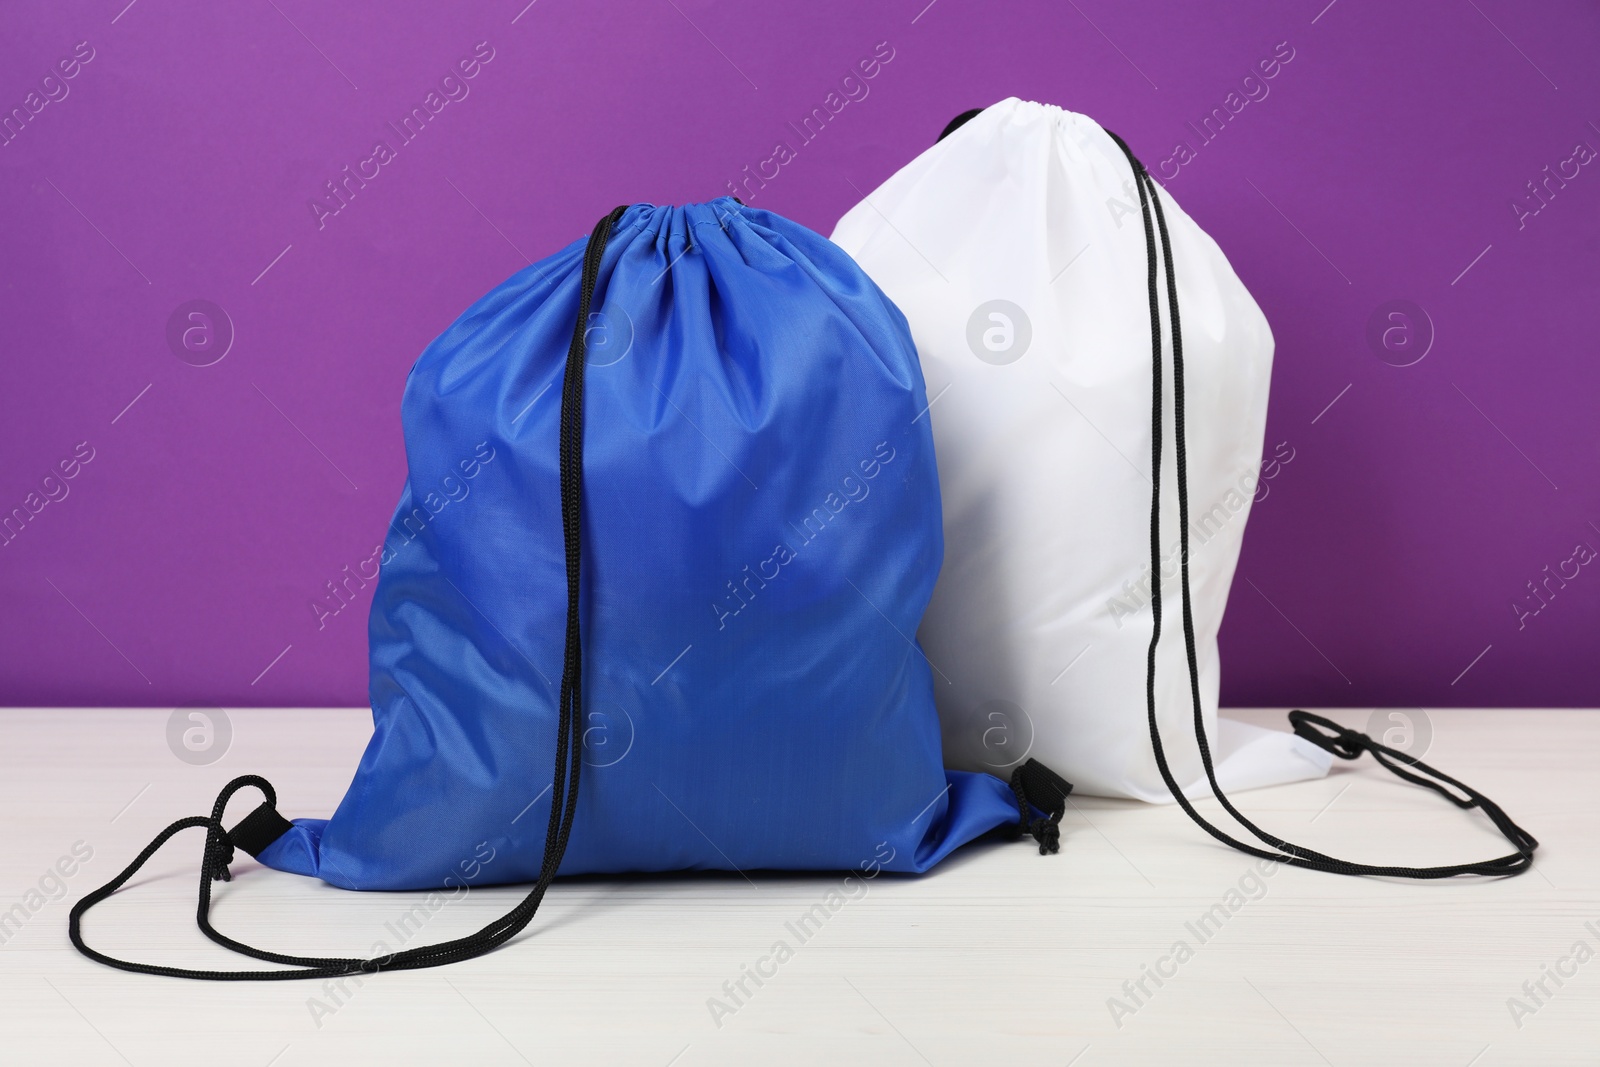 Photo of Two drawstring bags on white wooden table against purple background